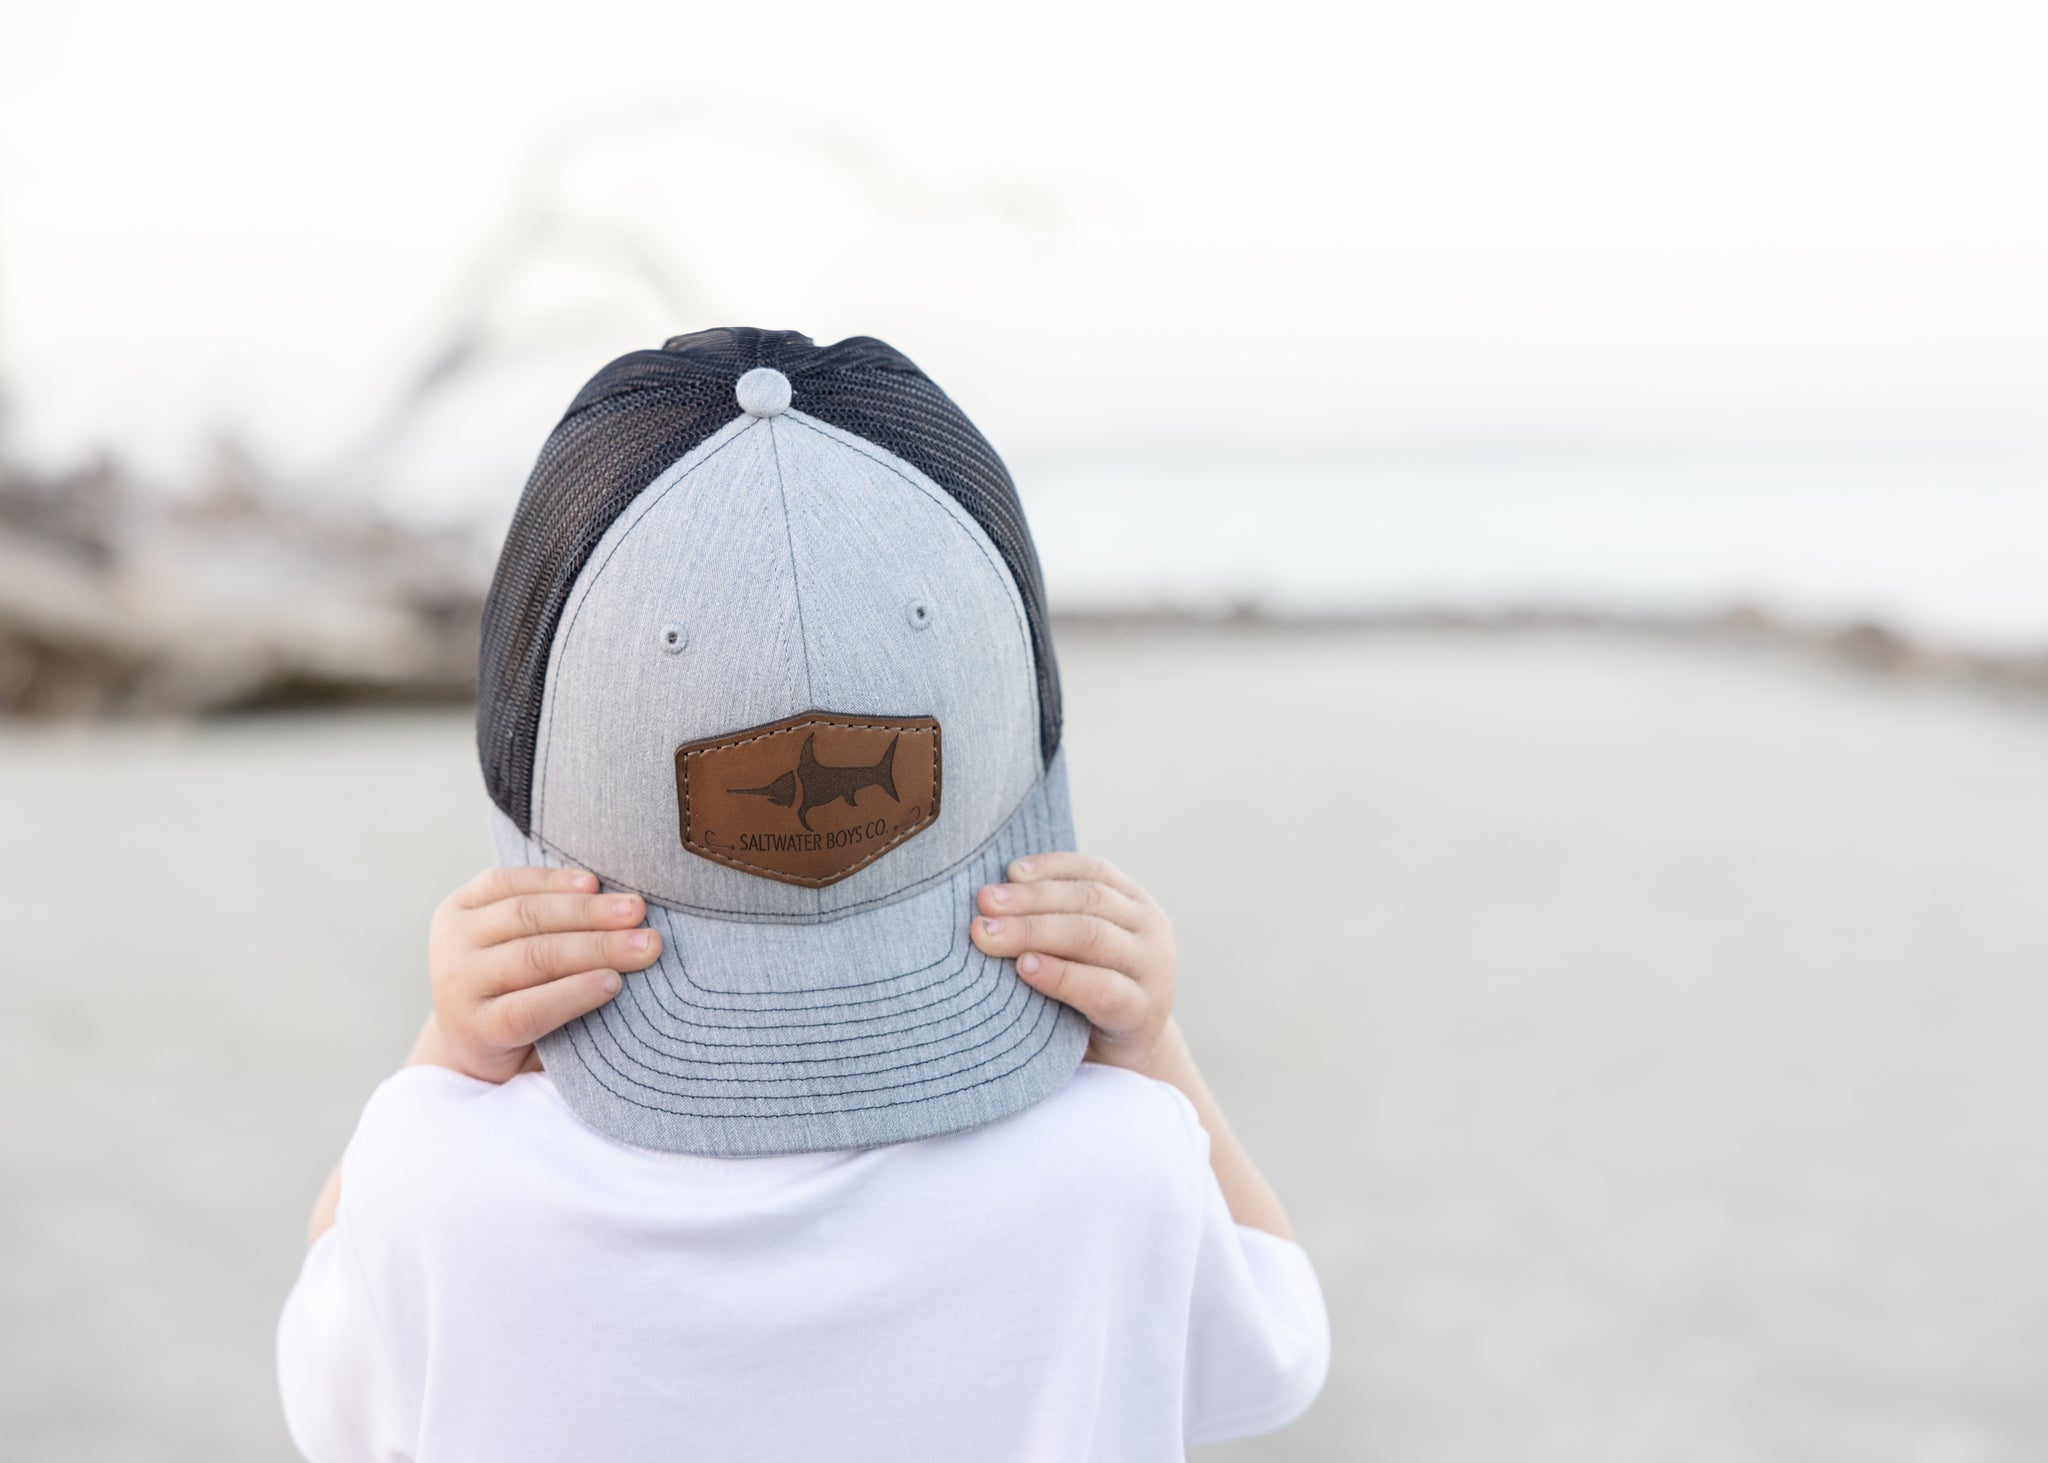 Saltwater Boys Co. Leather Logo Hat